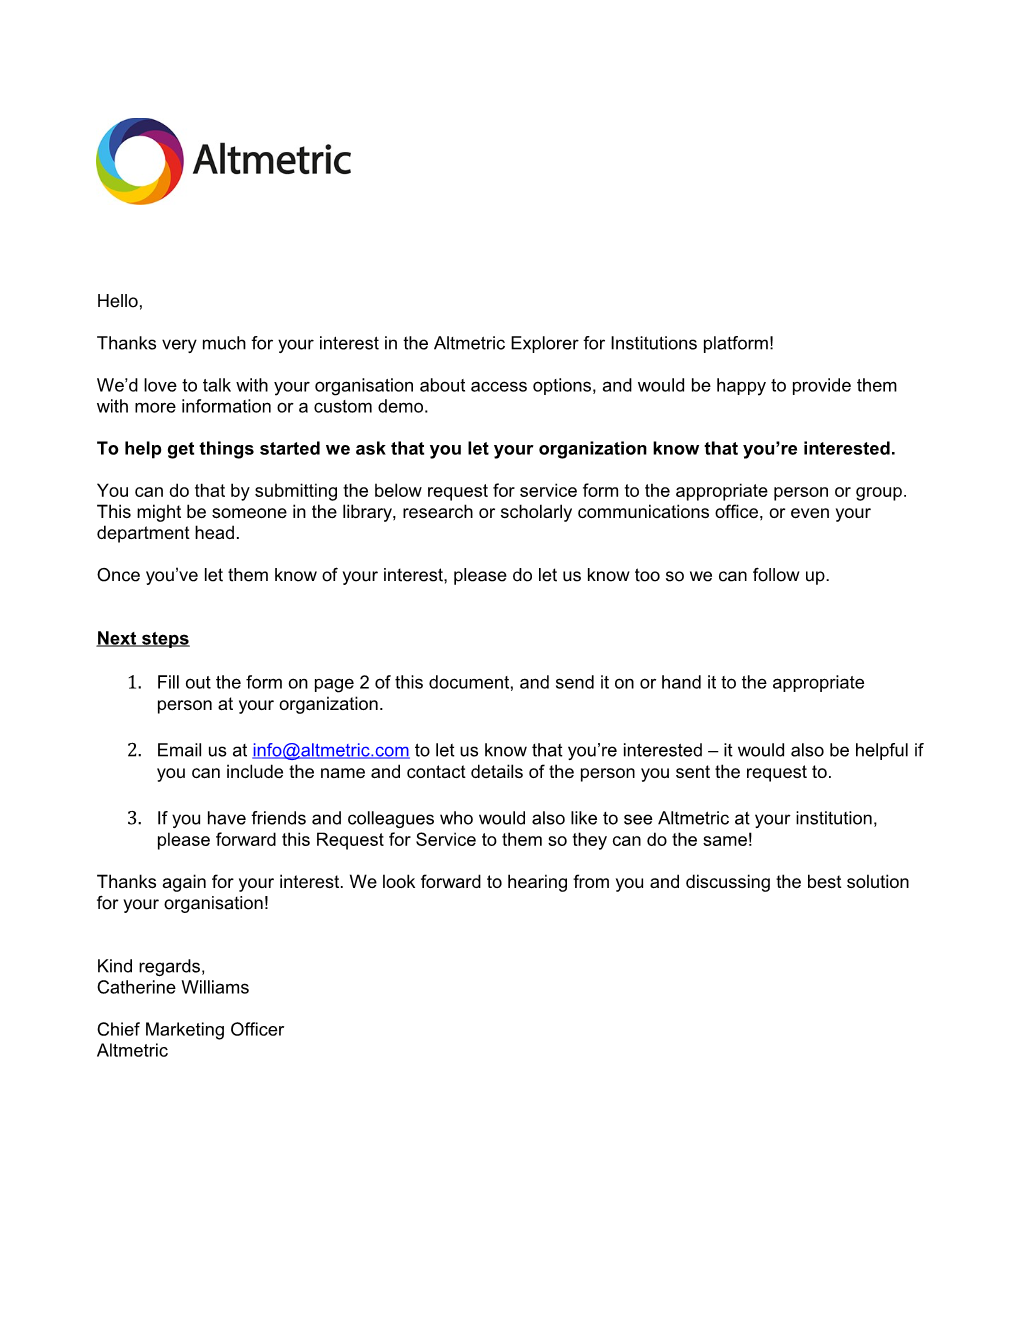 Thanks Very Much for Your Interest in the Altmetric Explorer for Institutions Platform!